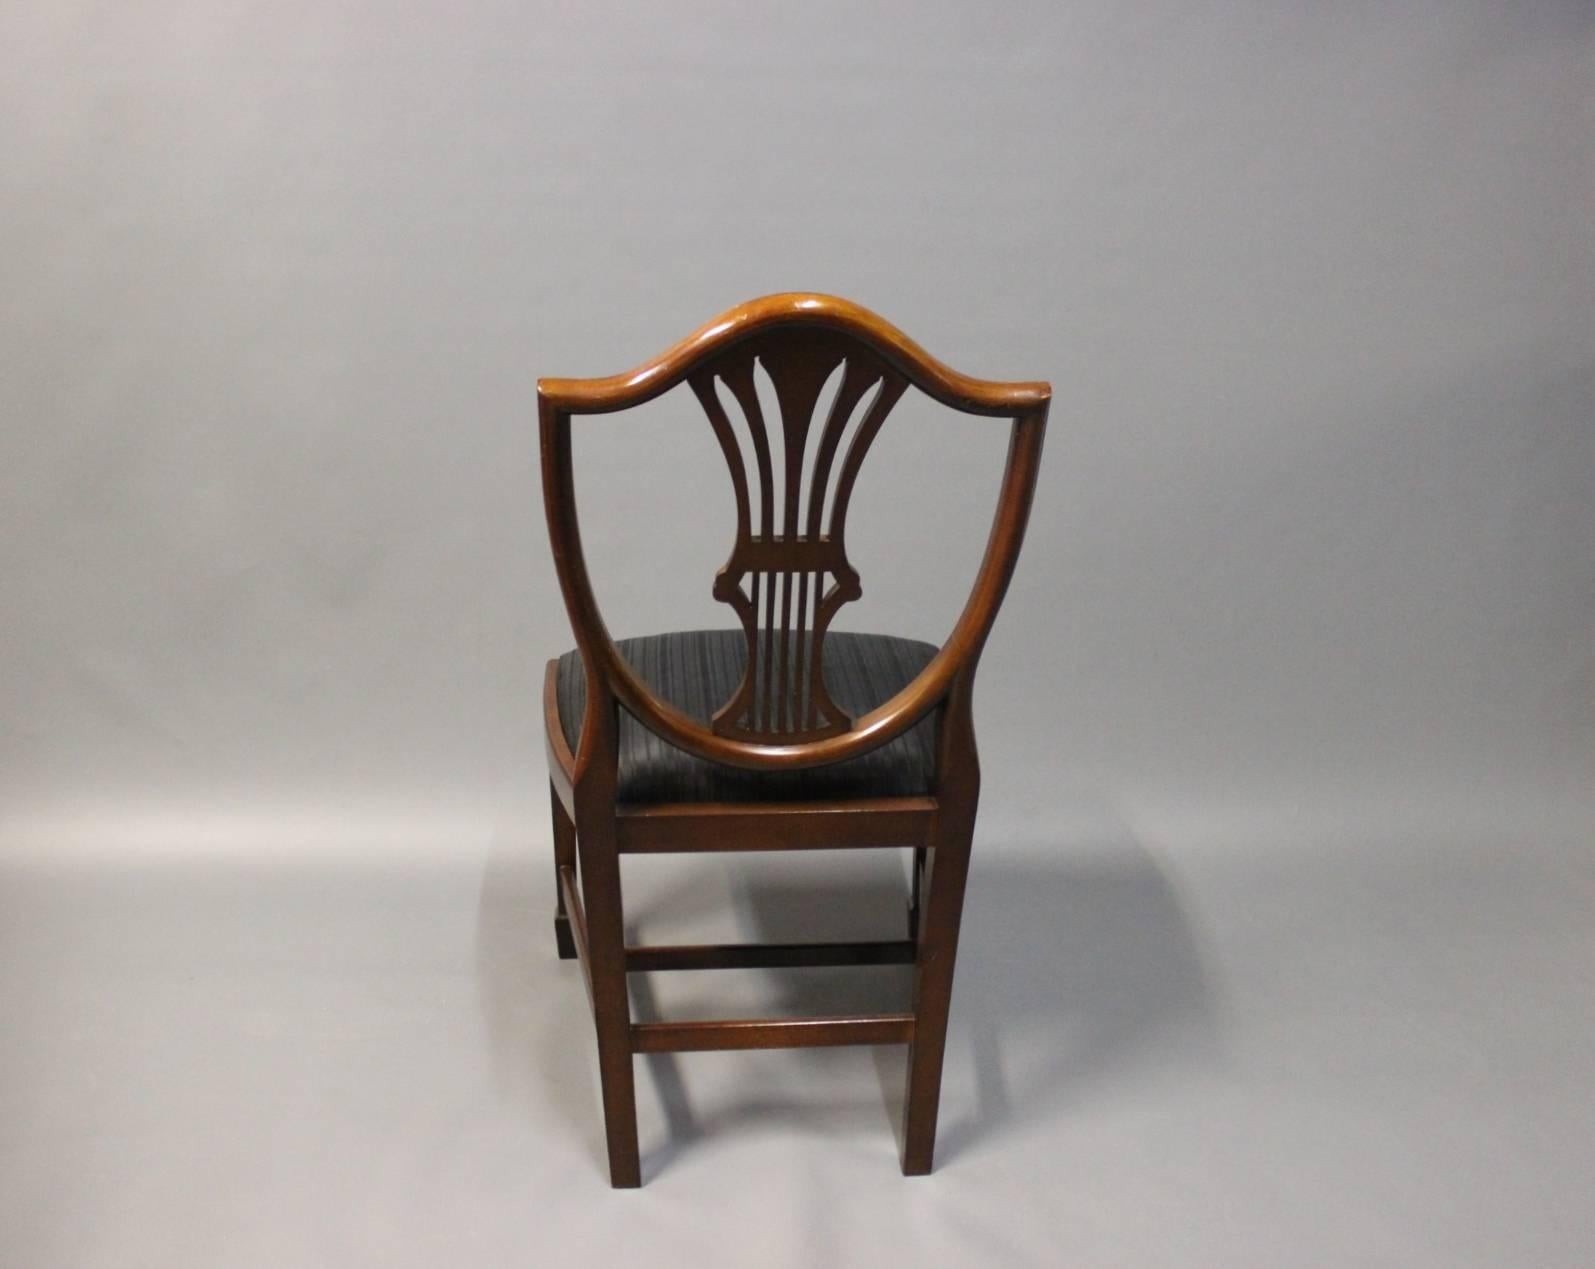 Danish Set of Four Antique Hepplewhite Dining Room Chairs in Mahogany, England, 1920s